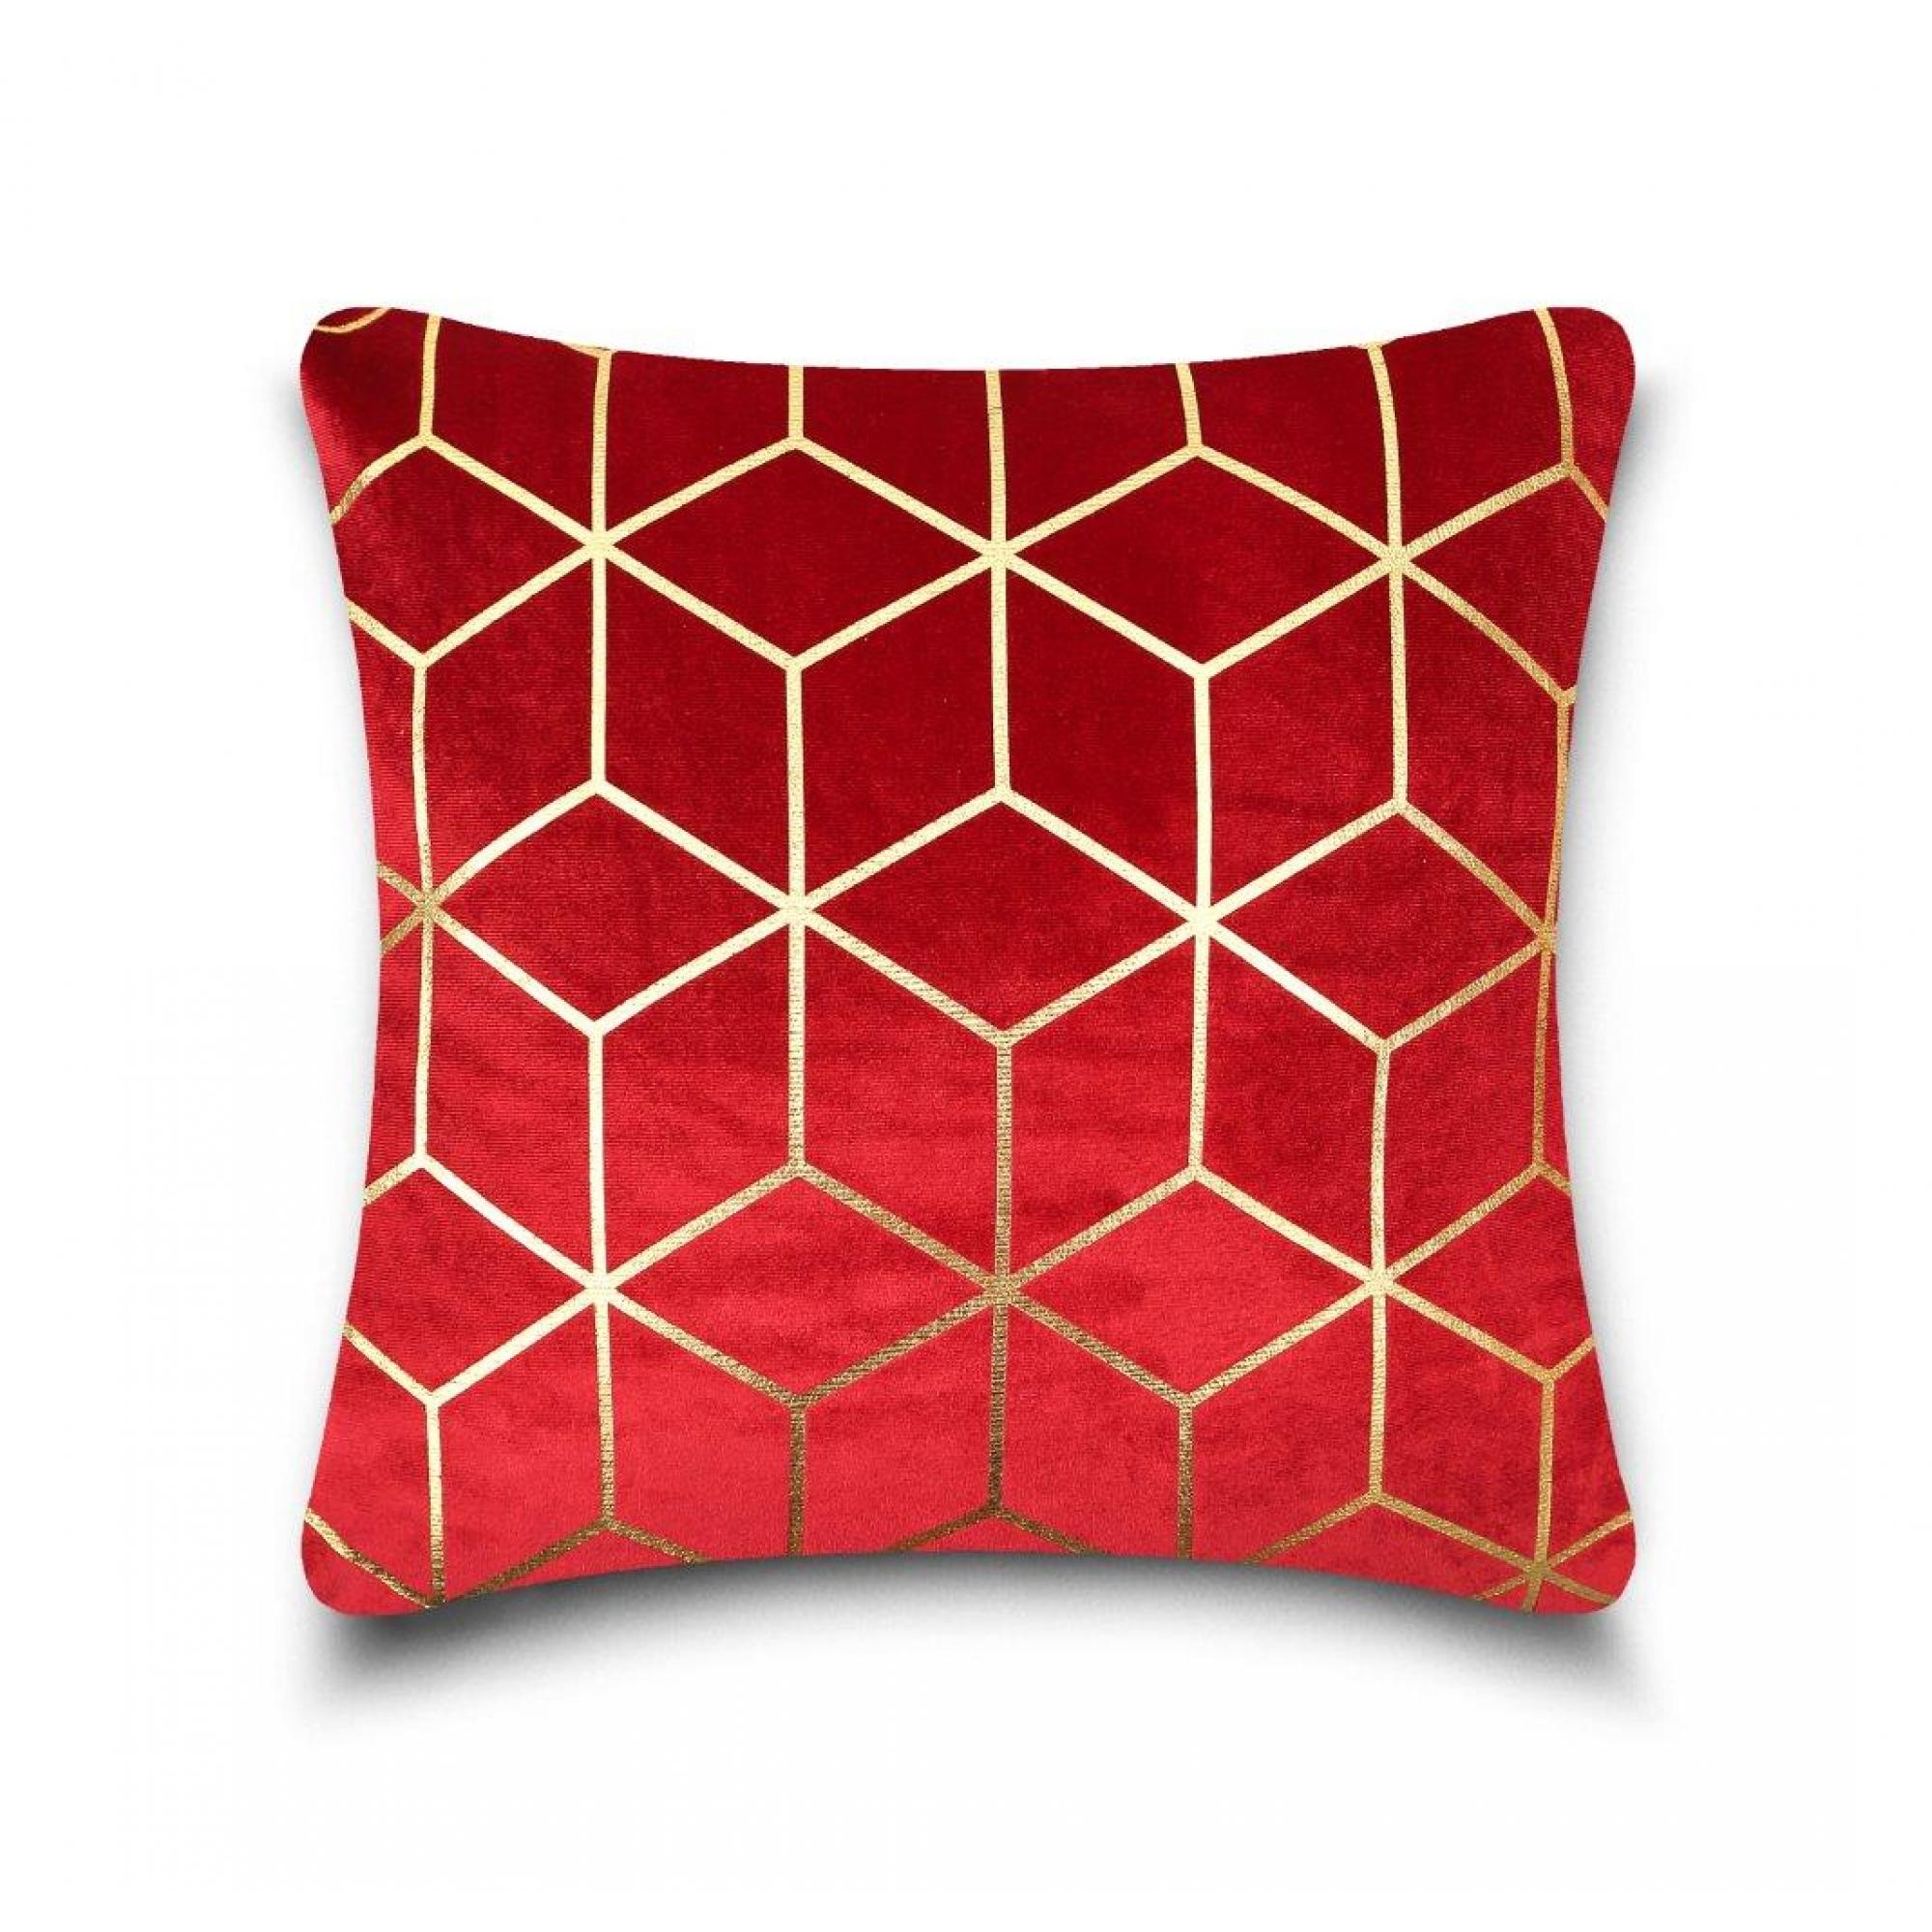 CUSHION COVER METALLIC CUBE 43x43 RED-GOLD